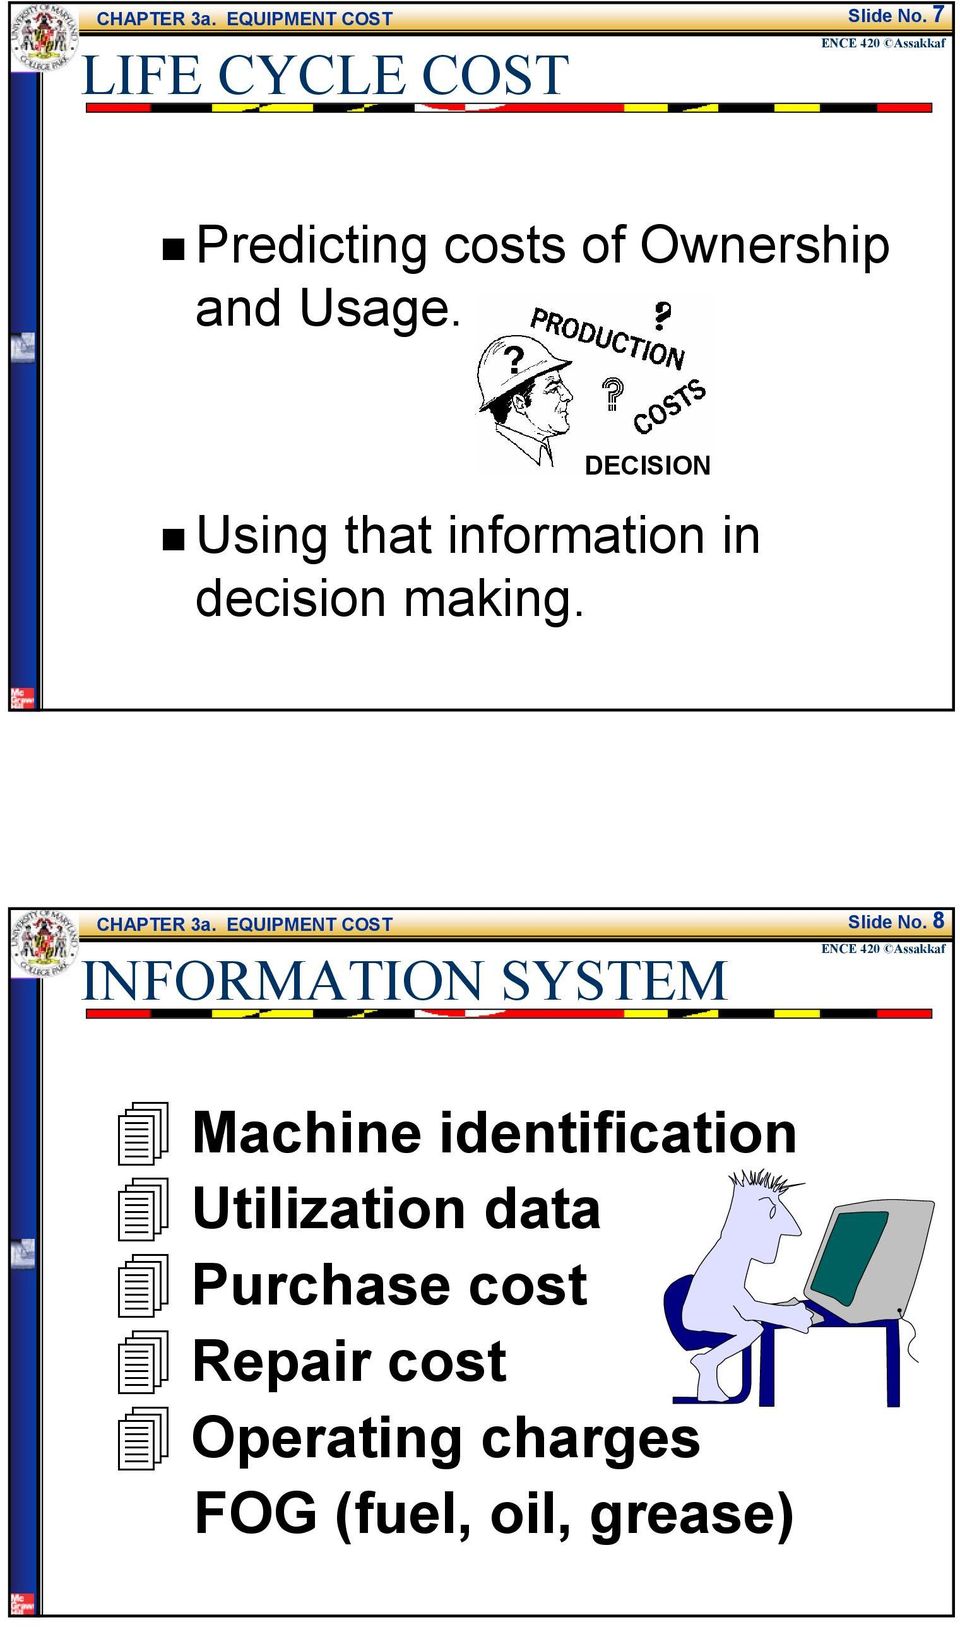 DECISION Using that information in decision making.